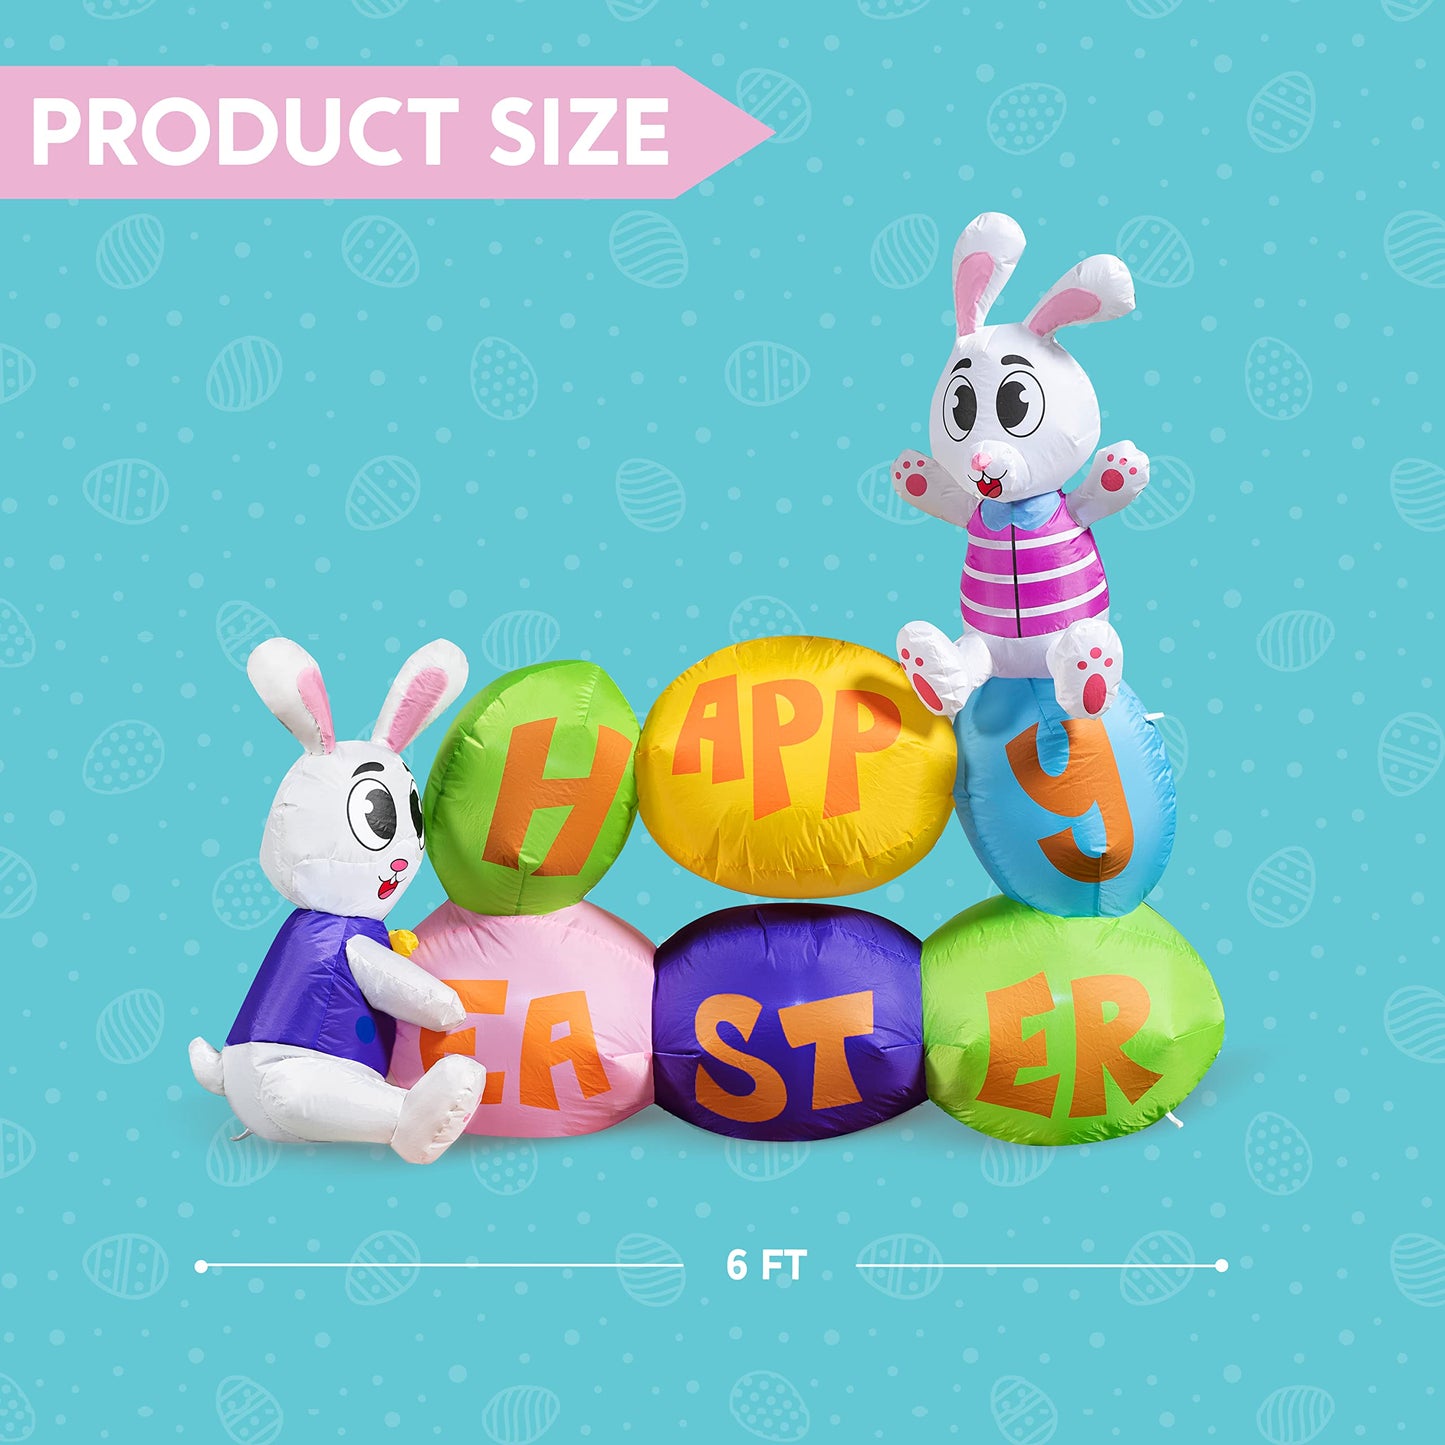 Large Happy Easter Sign Inflatable Outdoor Decorations  (6 ft)